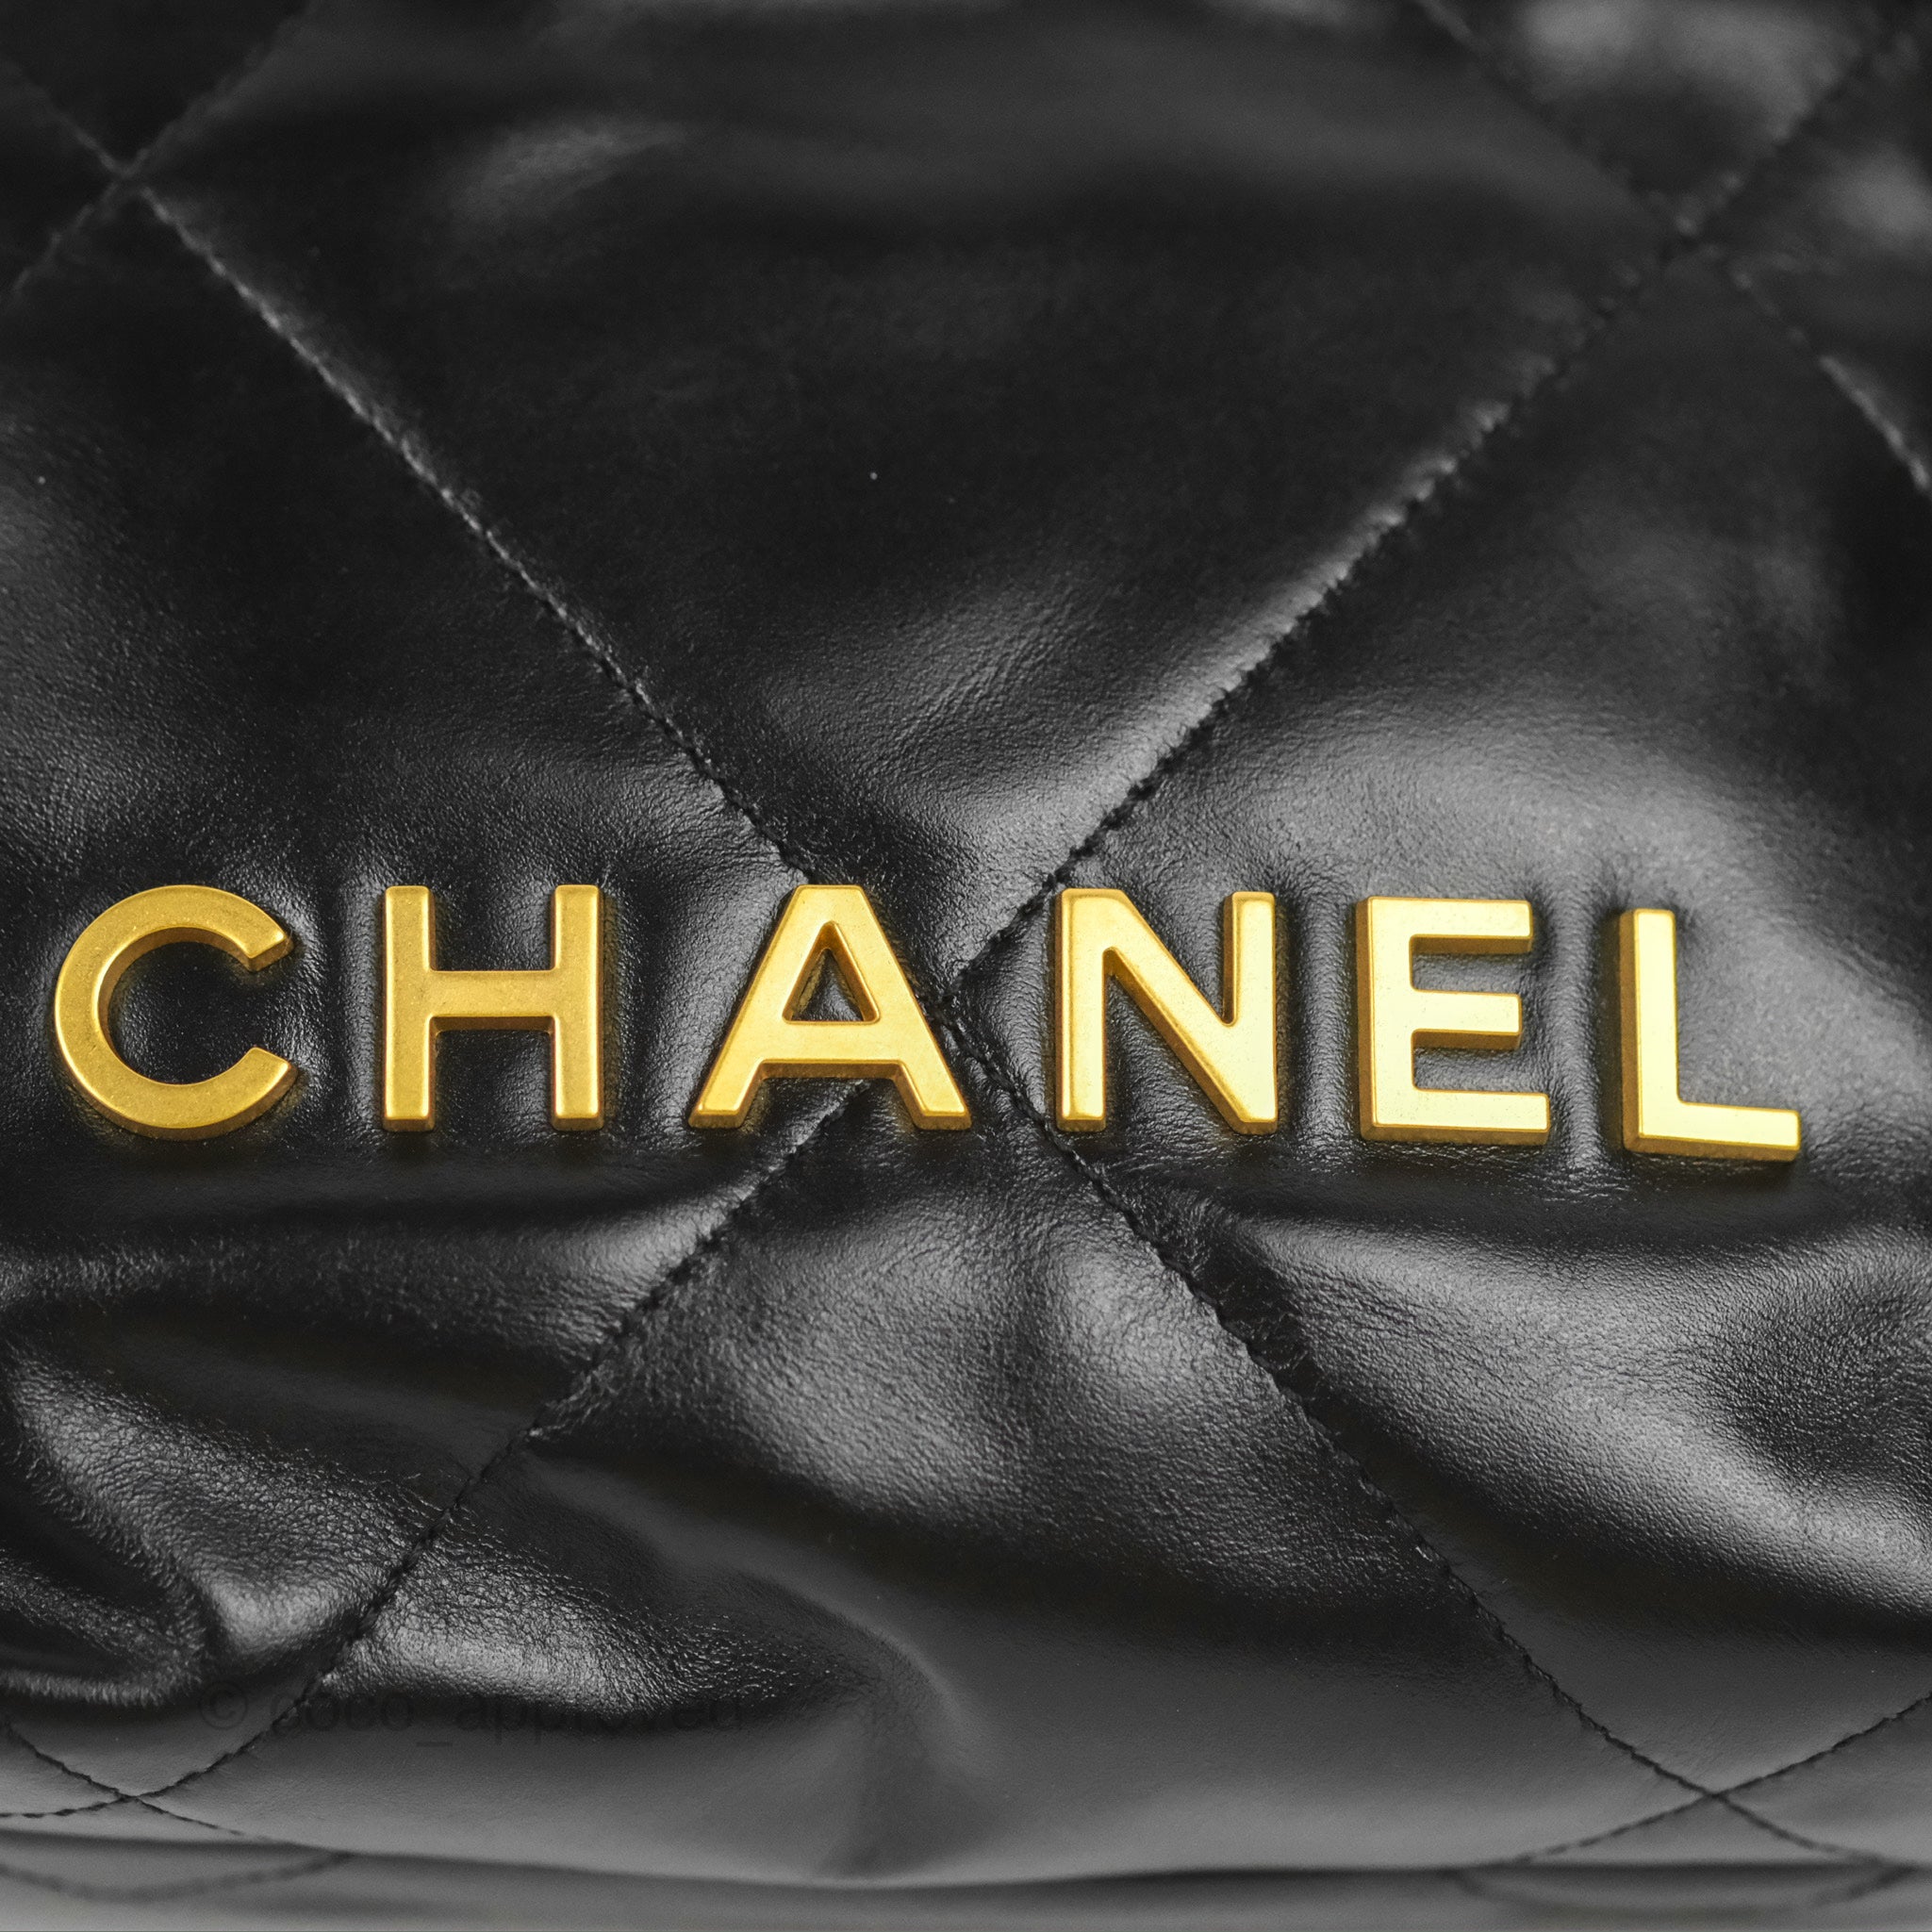 🆕 AUTHENTIC CHANEL 22 BAG SMALL BLACK CALFSKIN IN GOLD HARDWARE